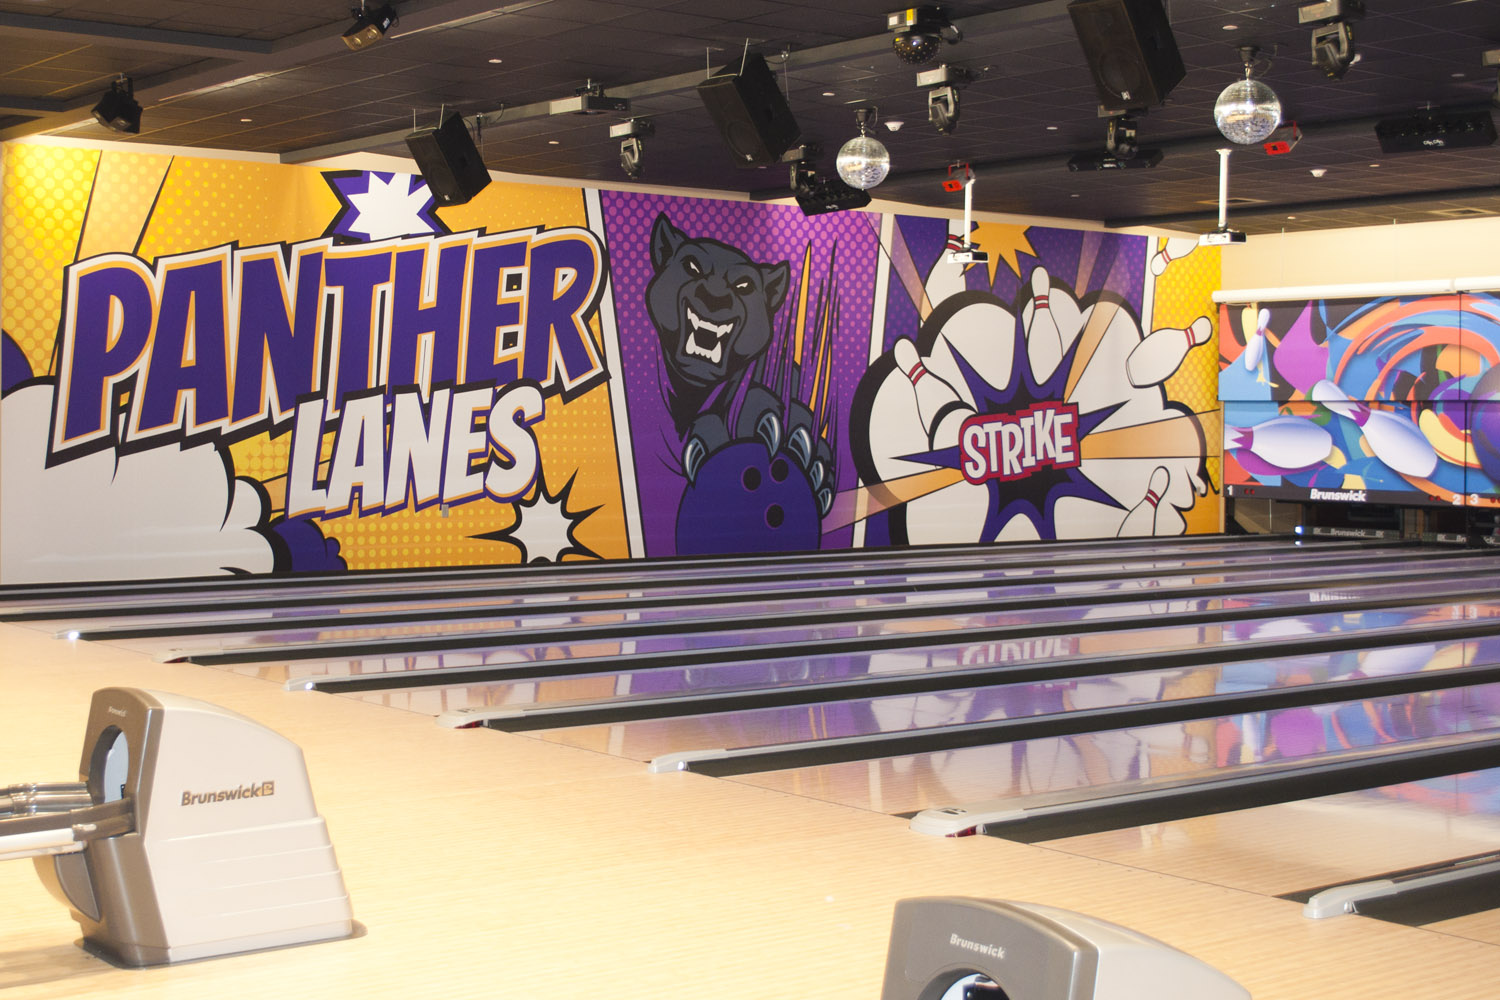 Bowling Lane Wall Mural for a University's Entertainment Center - Custom Printed Wall Paper Graphics